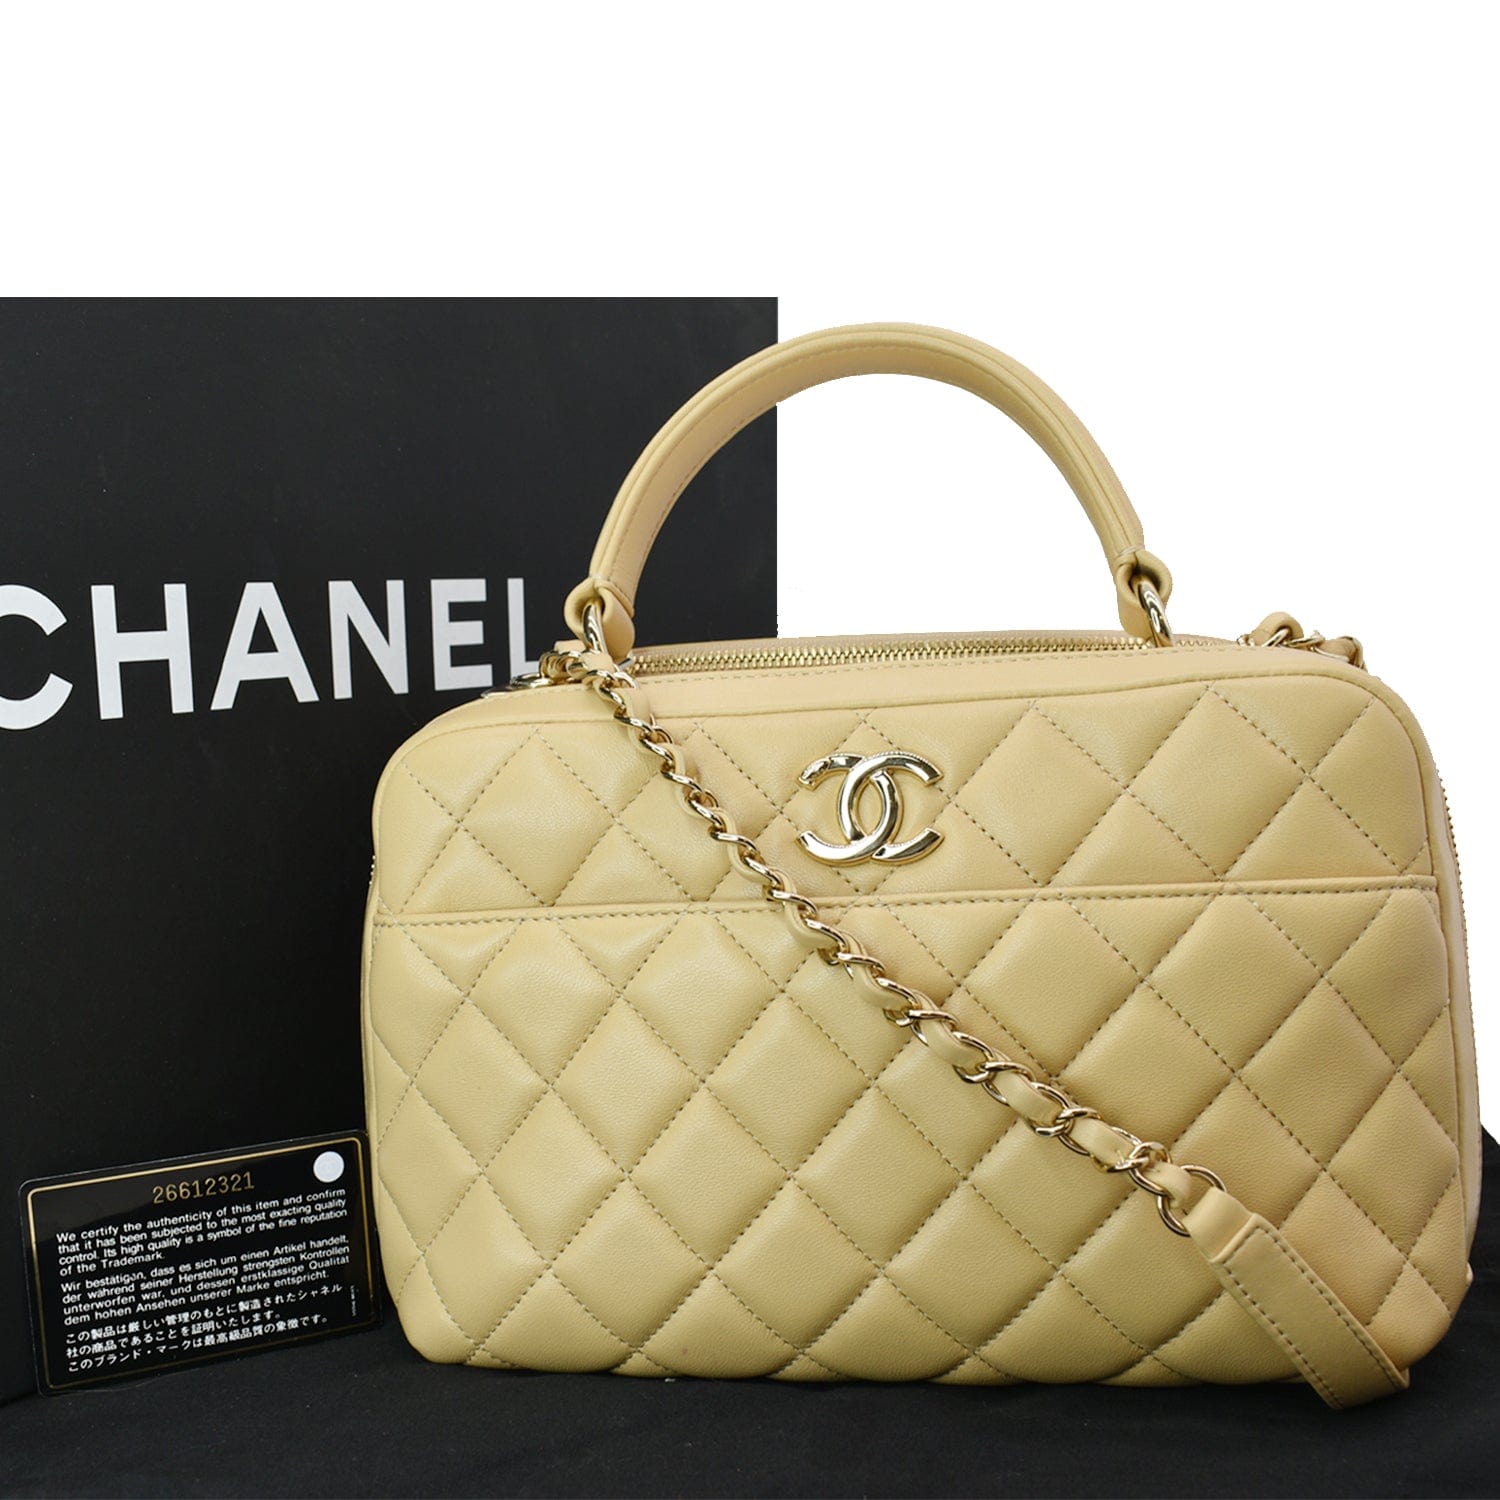 Chanel Beige Leather Quilted Bag with CC Logo